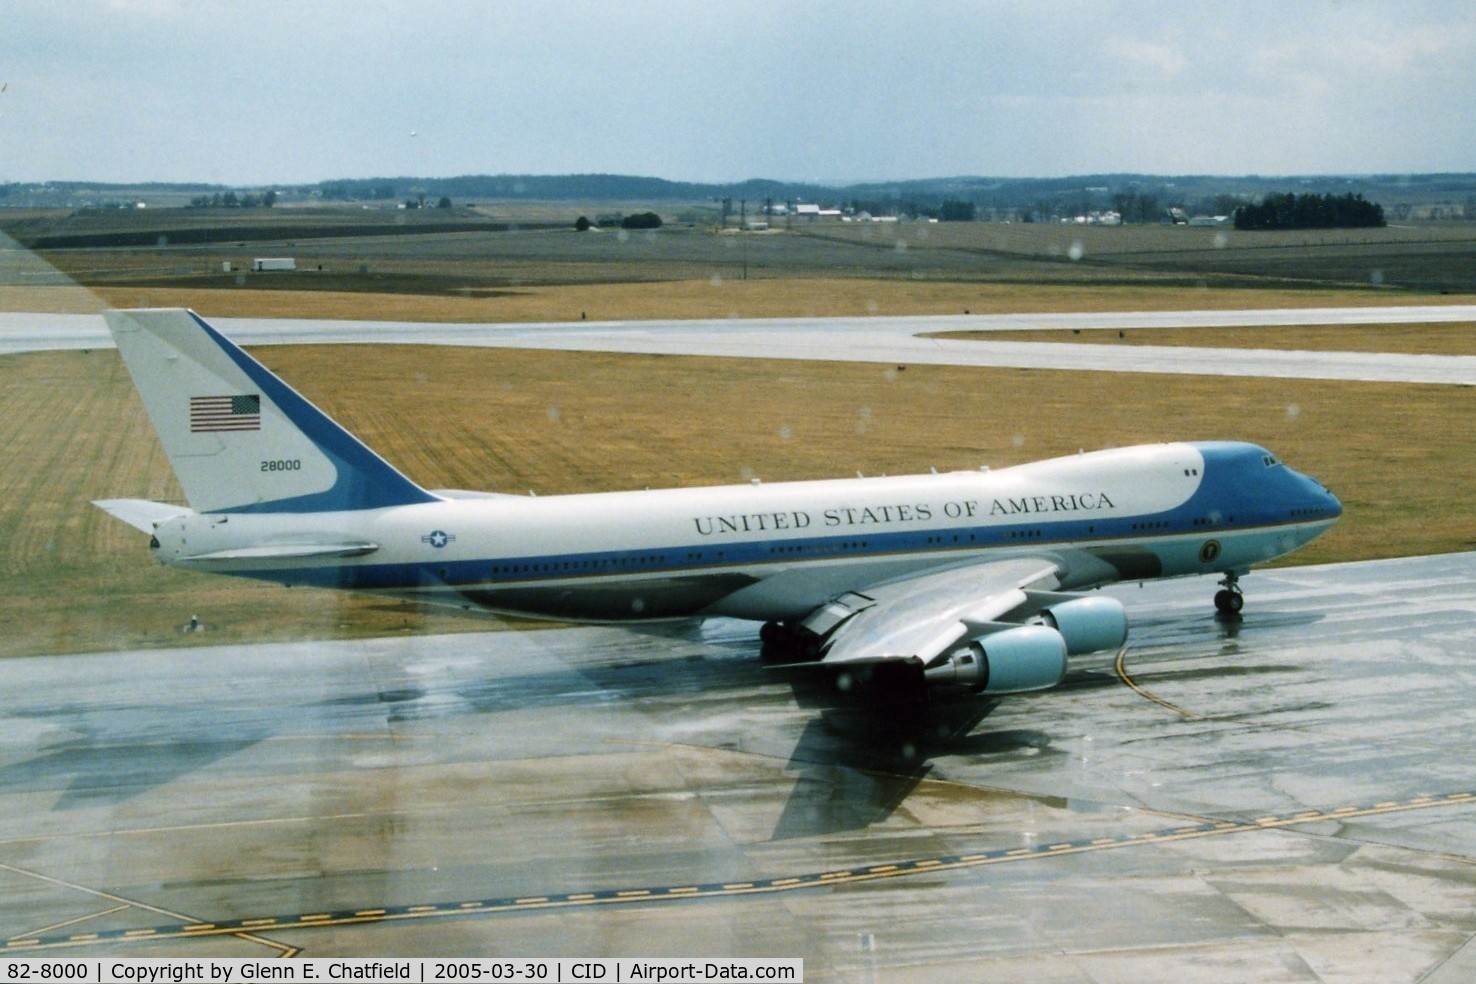 82-8000, 1987 Boeing VC-25A (747-2G4B) C/N 23824, Air Force One taxiing for departure